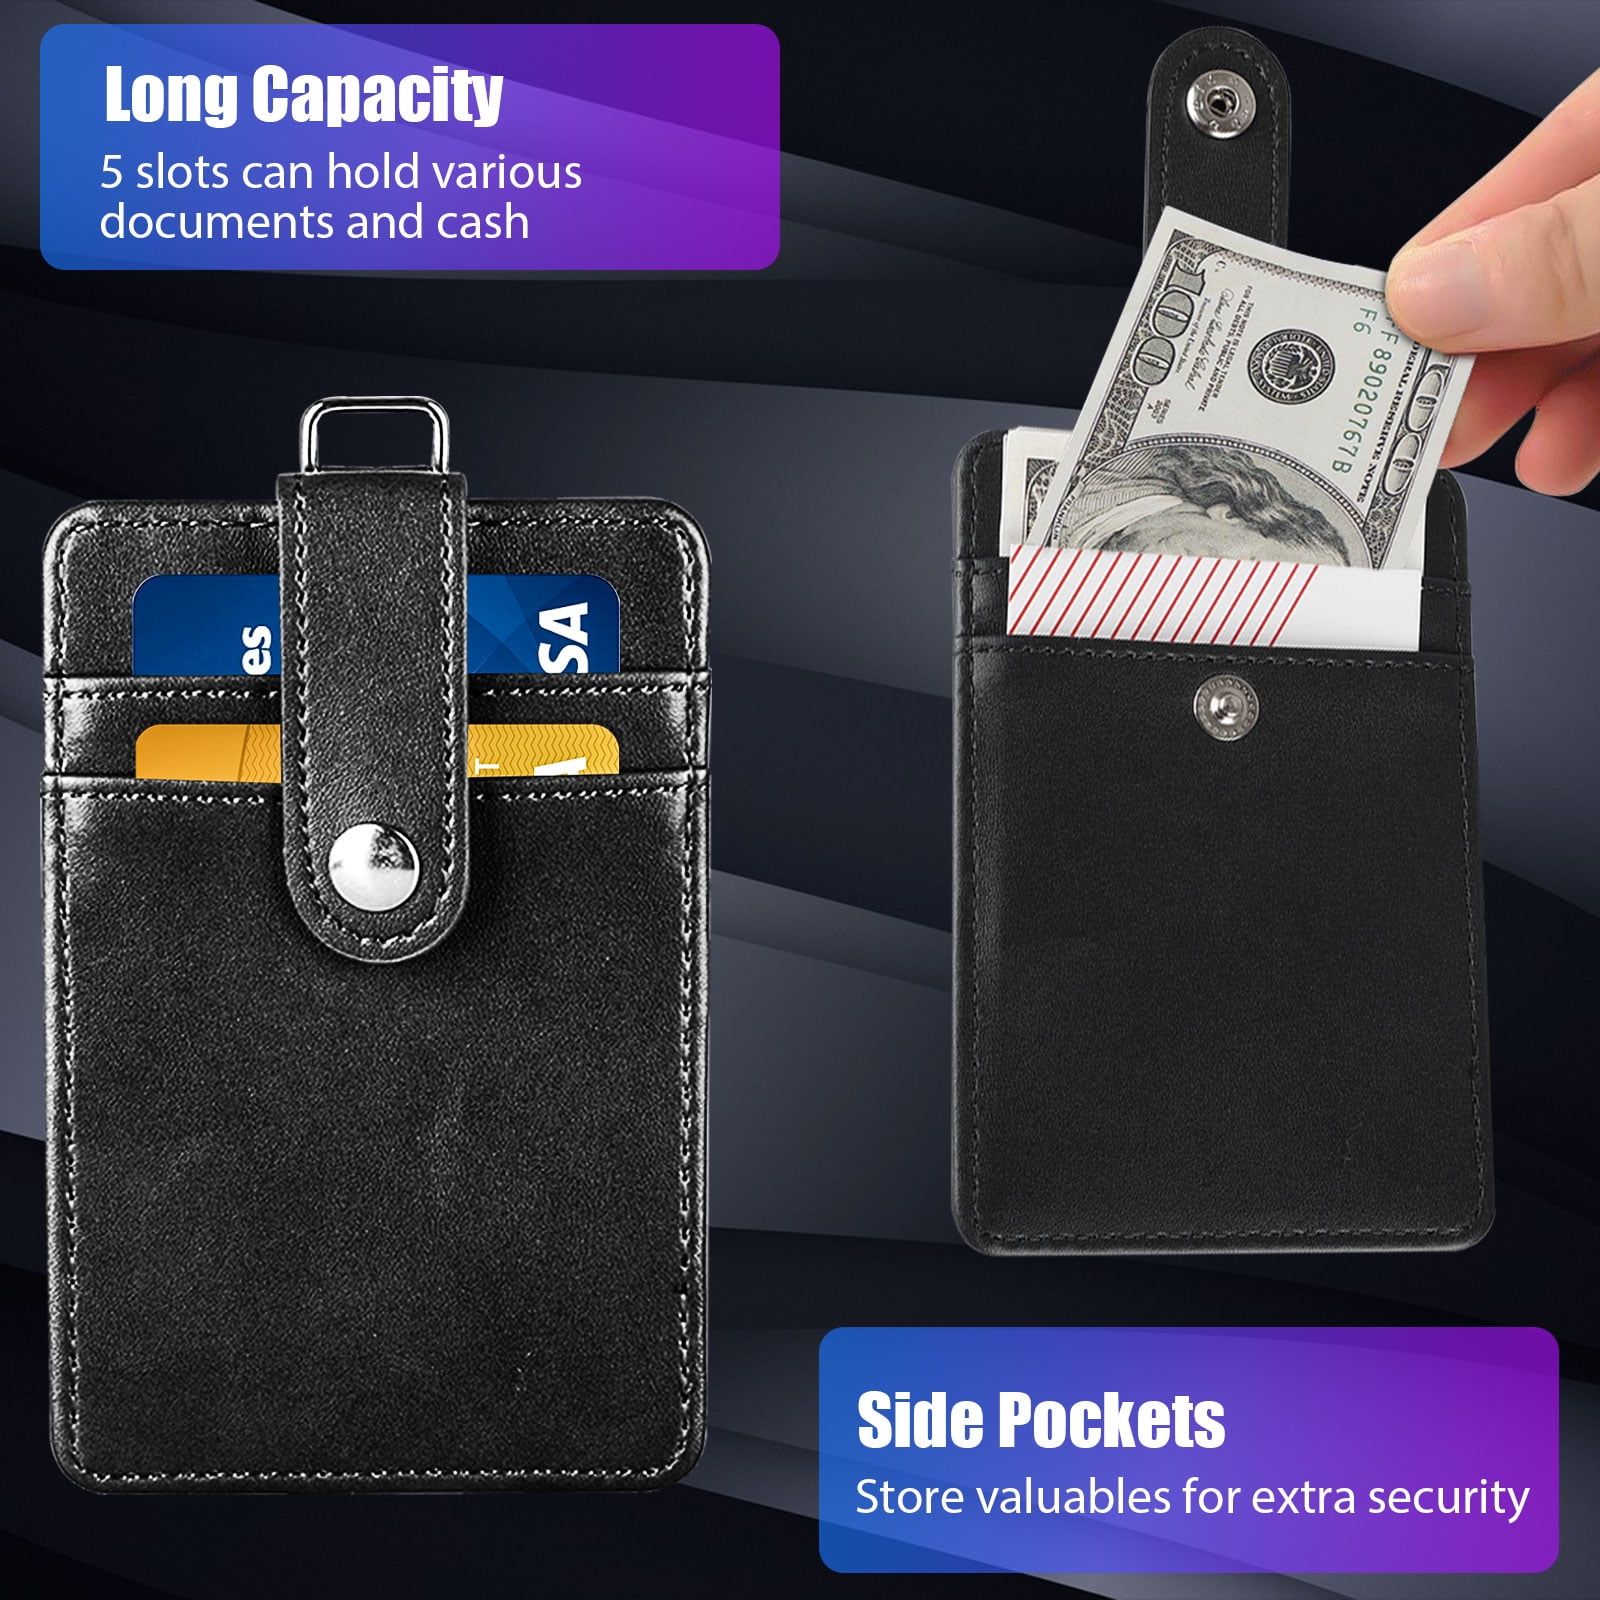 ELV Badge Holder with Zipper, ID Badge Card Holder Wallet with 5 Card Slots, 1 Side RFID Blocking Pocket and Neck Lanyard Strap for Offices ID